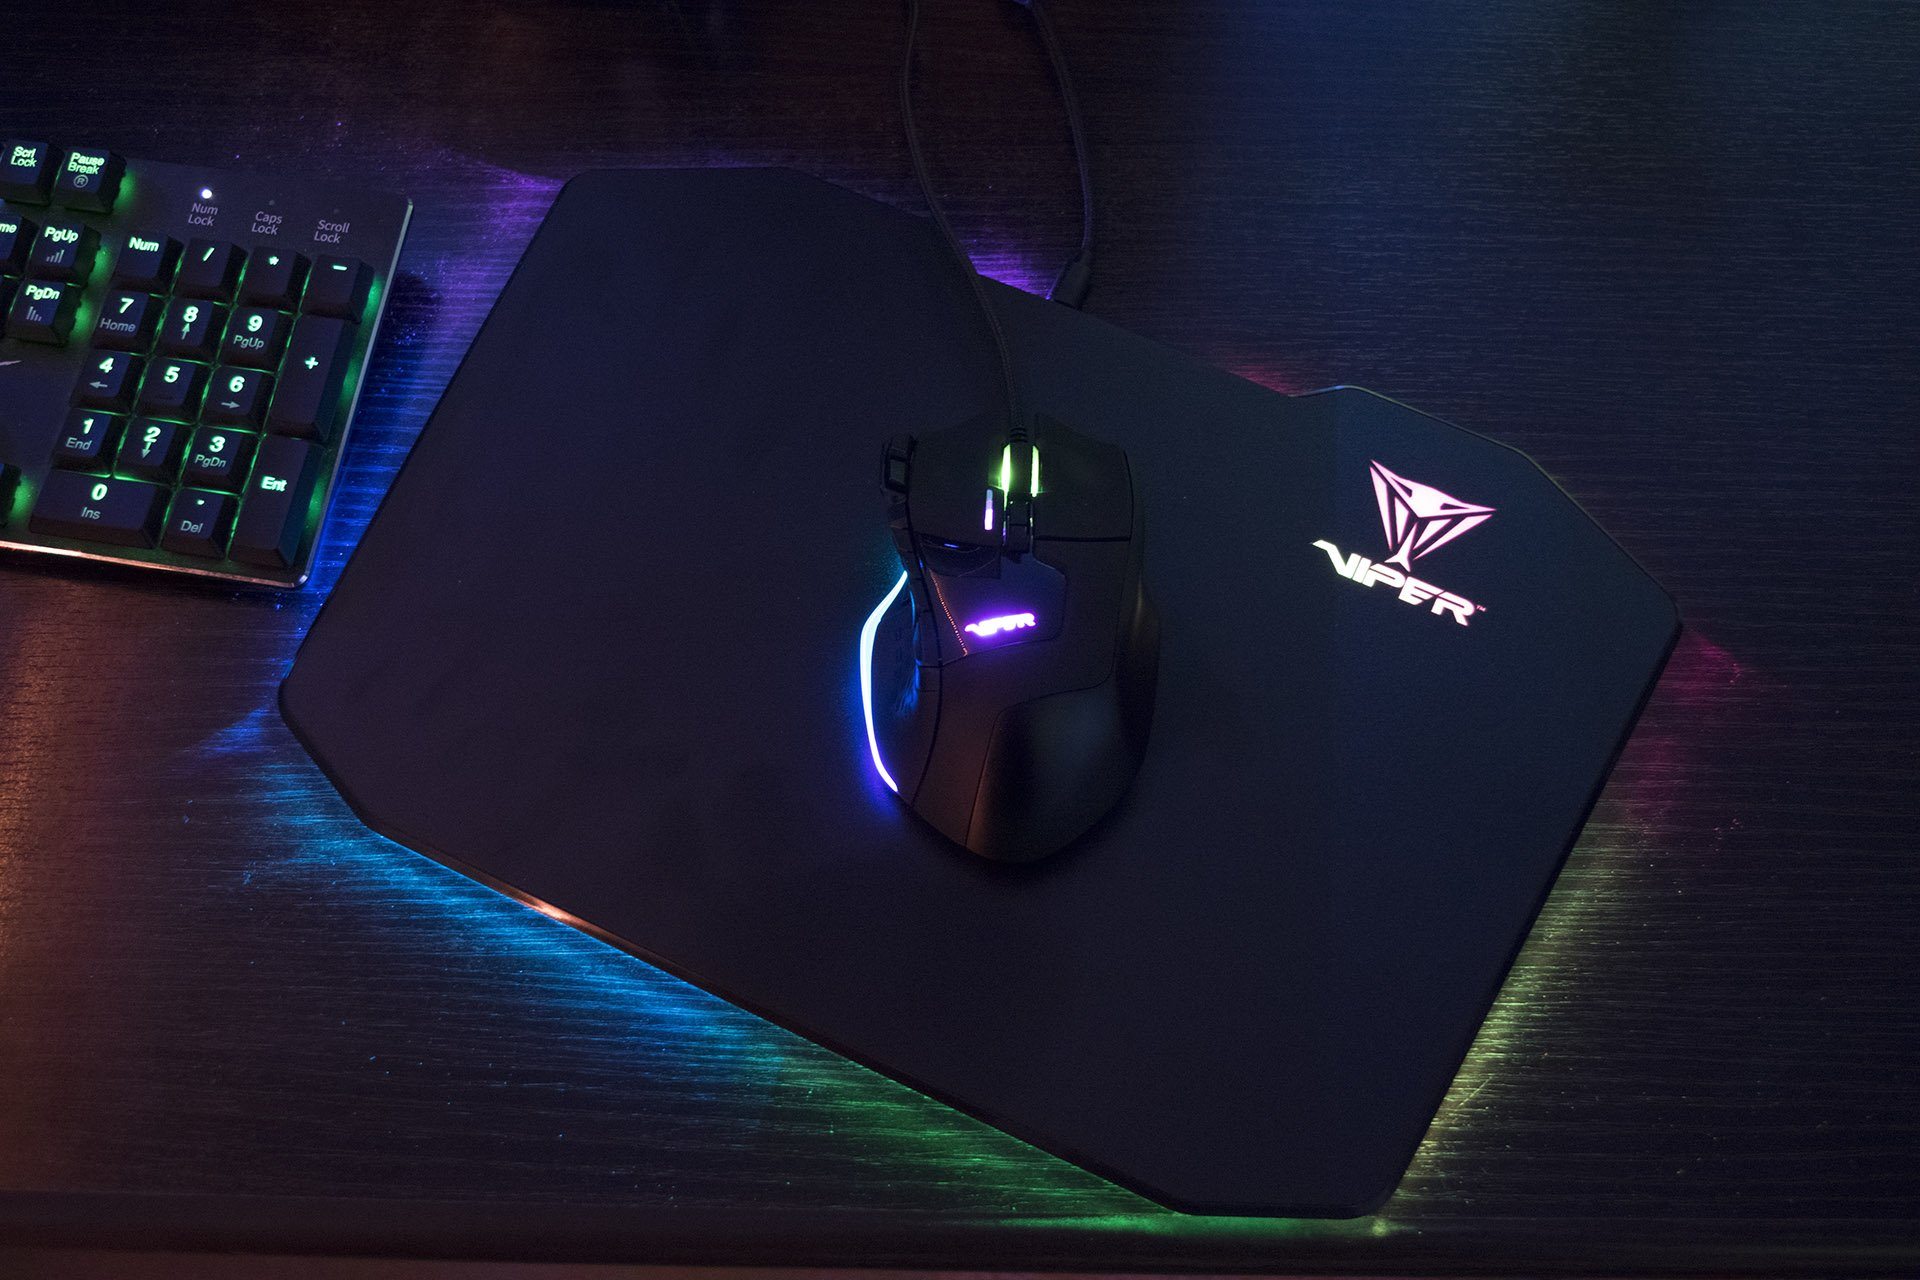 Best Gaming Mouse 2020 - Viper Gaming V570 Blackout Edition